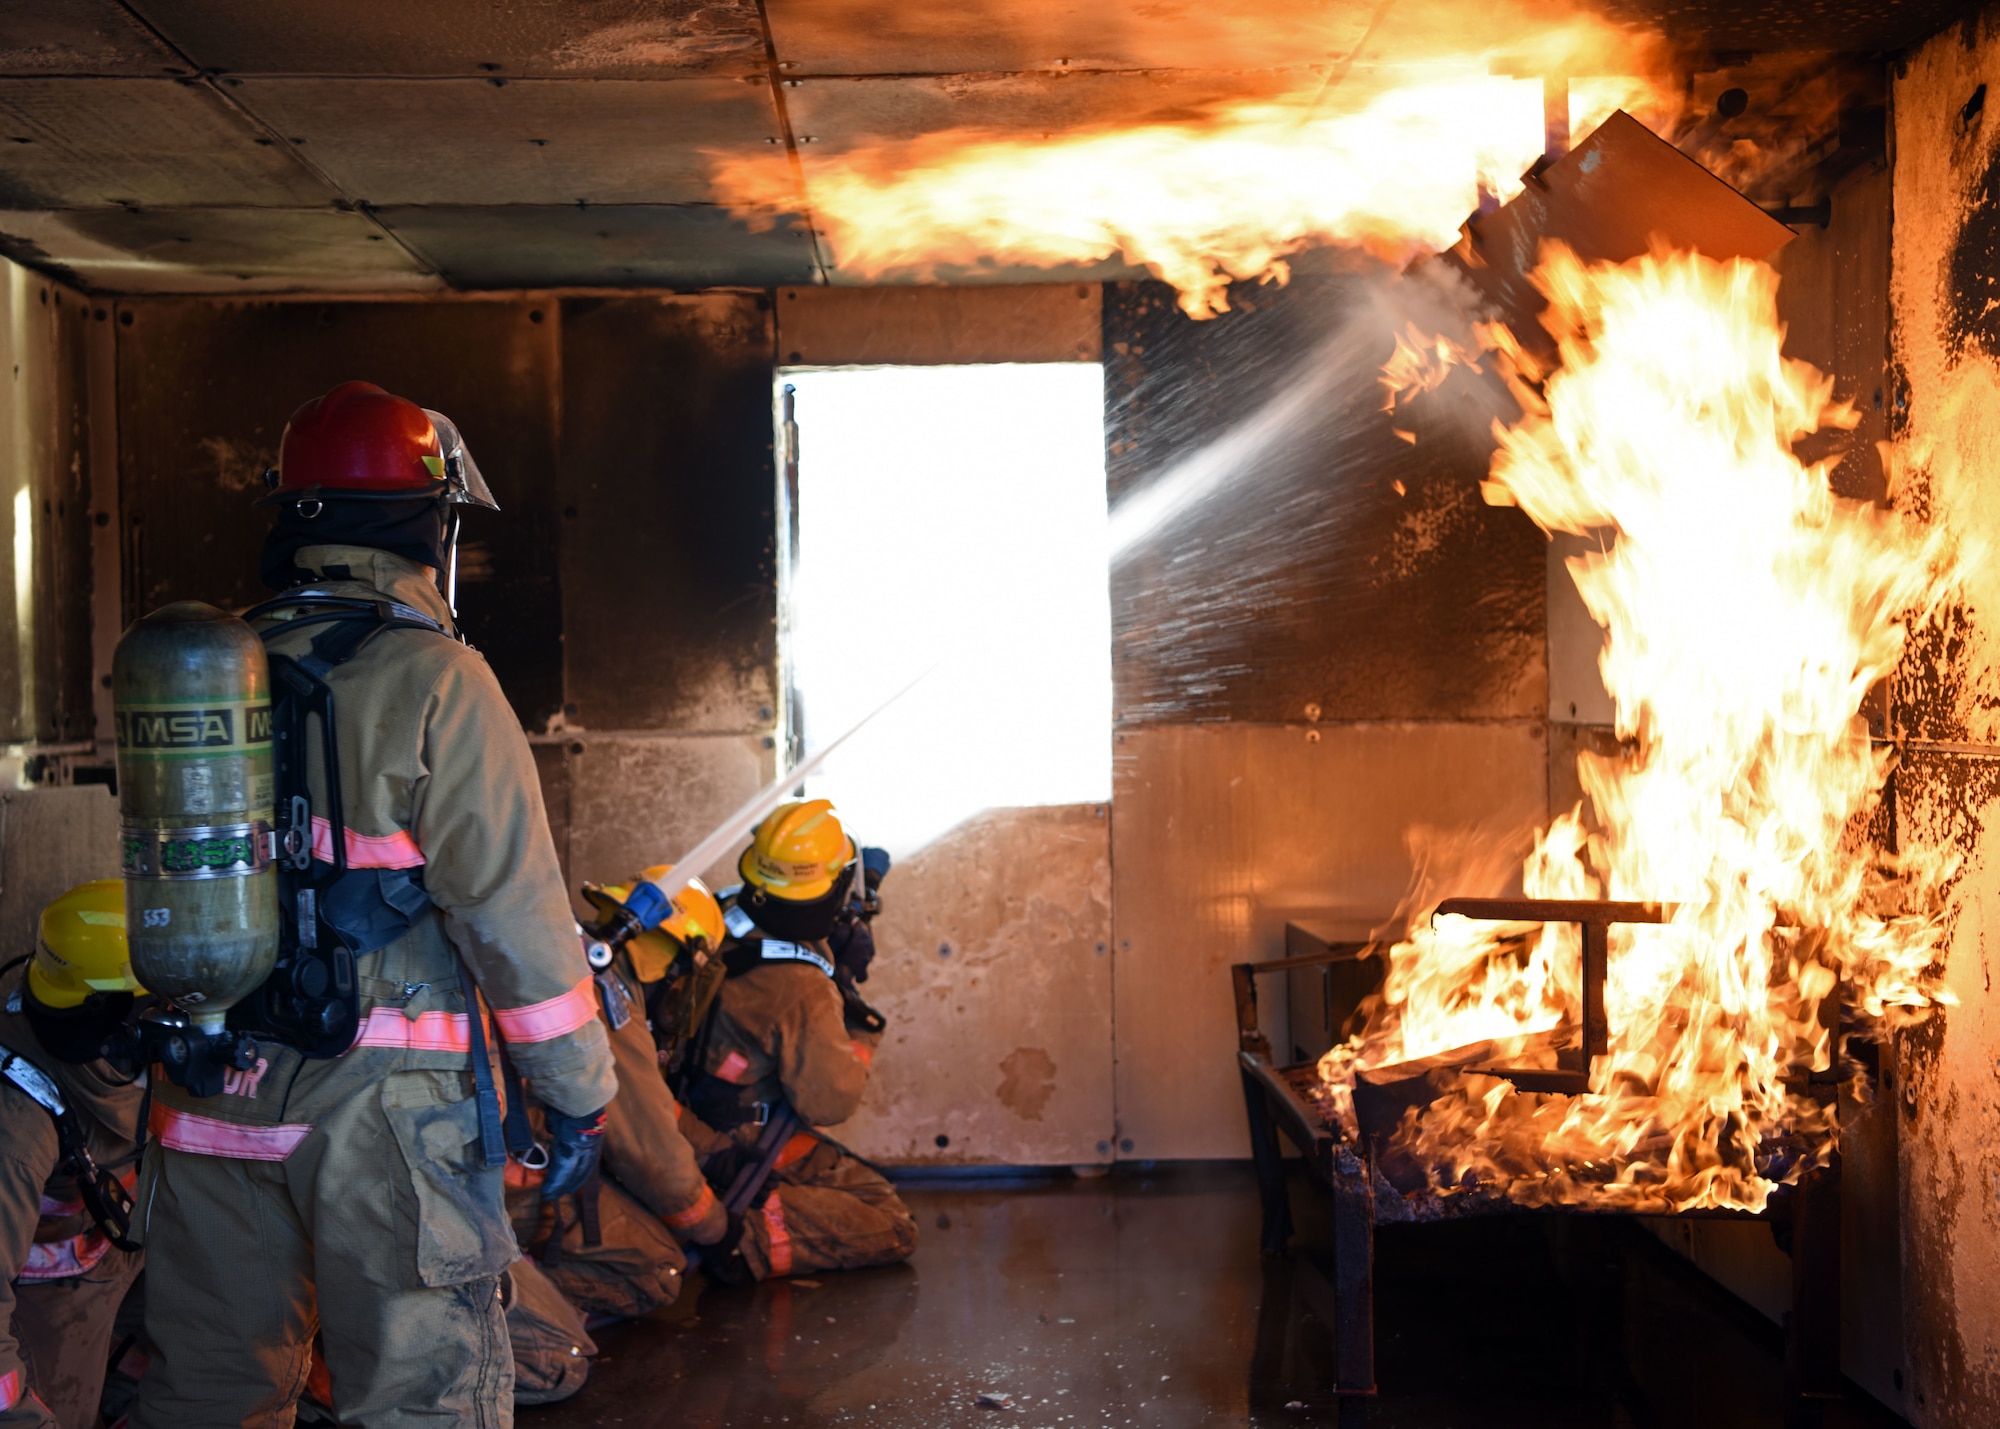 A team of students fight a fire while ventilating the room at the Louis F. Garland Department of Defense Fire Academy on Goodfellow Air Force Base, Texas, May 6, 2020. The students were assigned to three units which all had different roles to play during a structure fire. (U.S. Air Force photo by Airman 1st Class Ethan Sherwood)